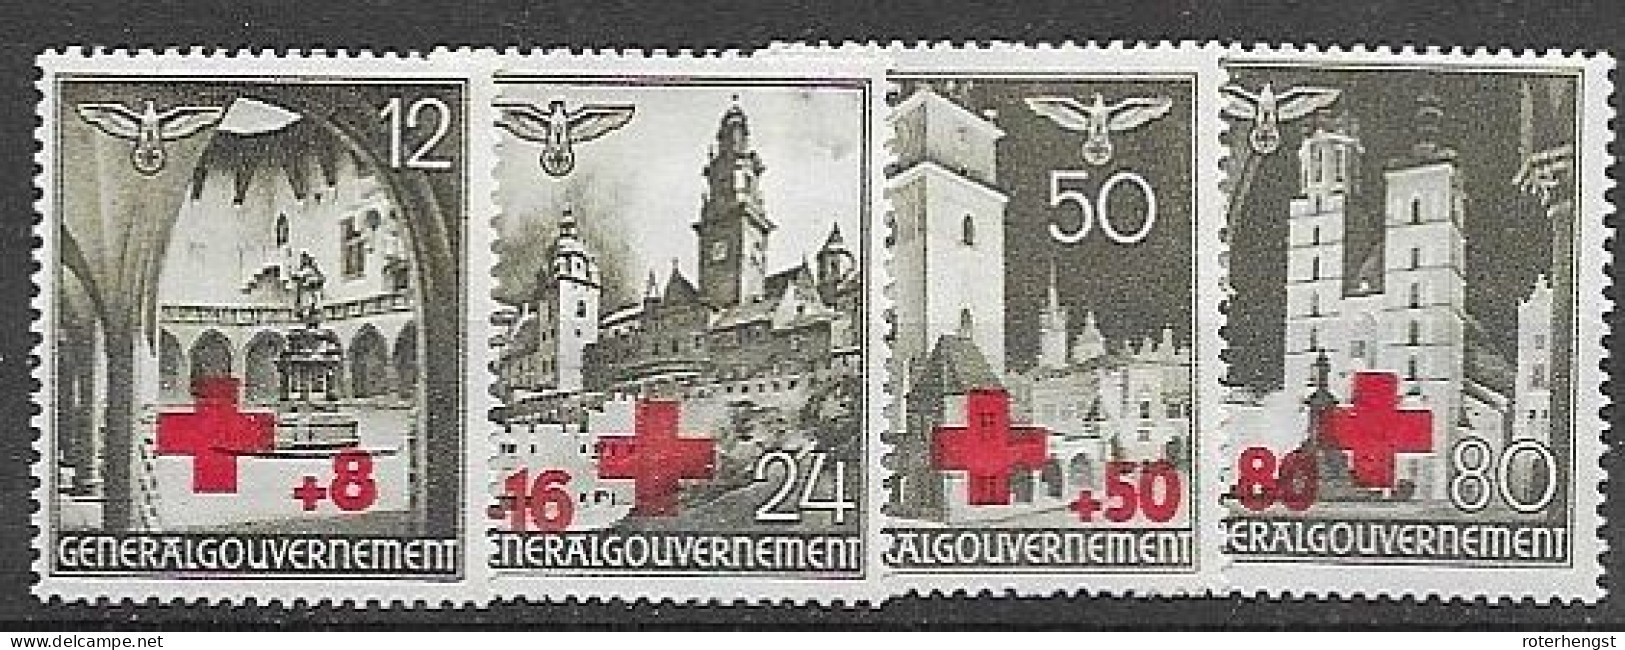 Generalgouvernement Mh * 1940 Red Cross Set Croix Rouge - Occupation 1938-45